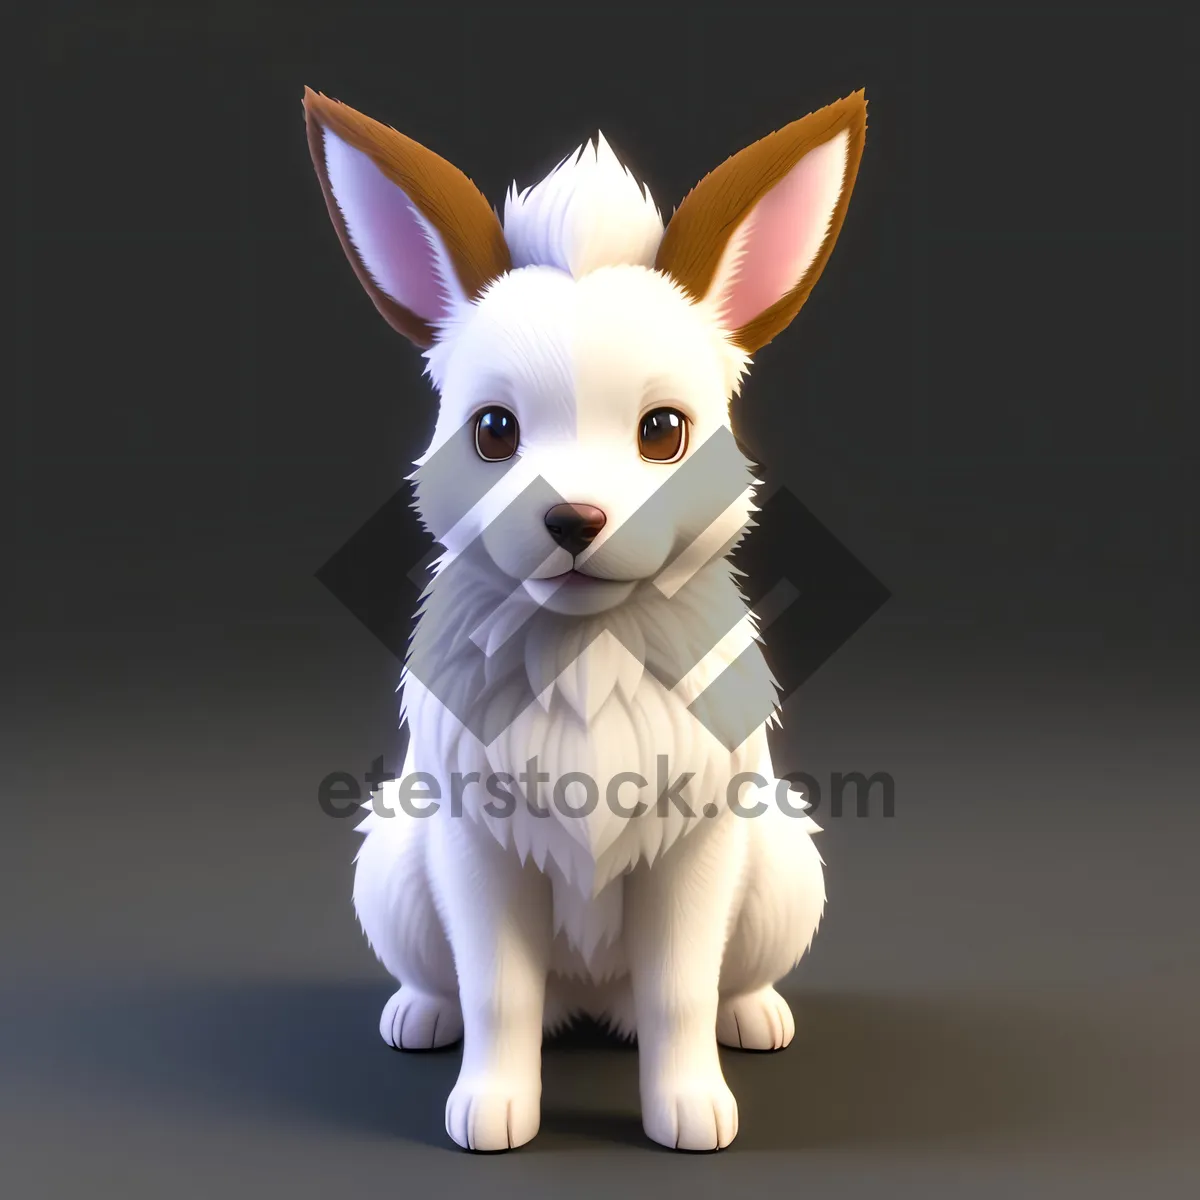 Picture of Furry Bunny with Cute Ears - Adorable Pet Portrait